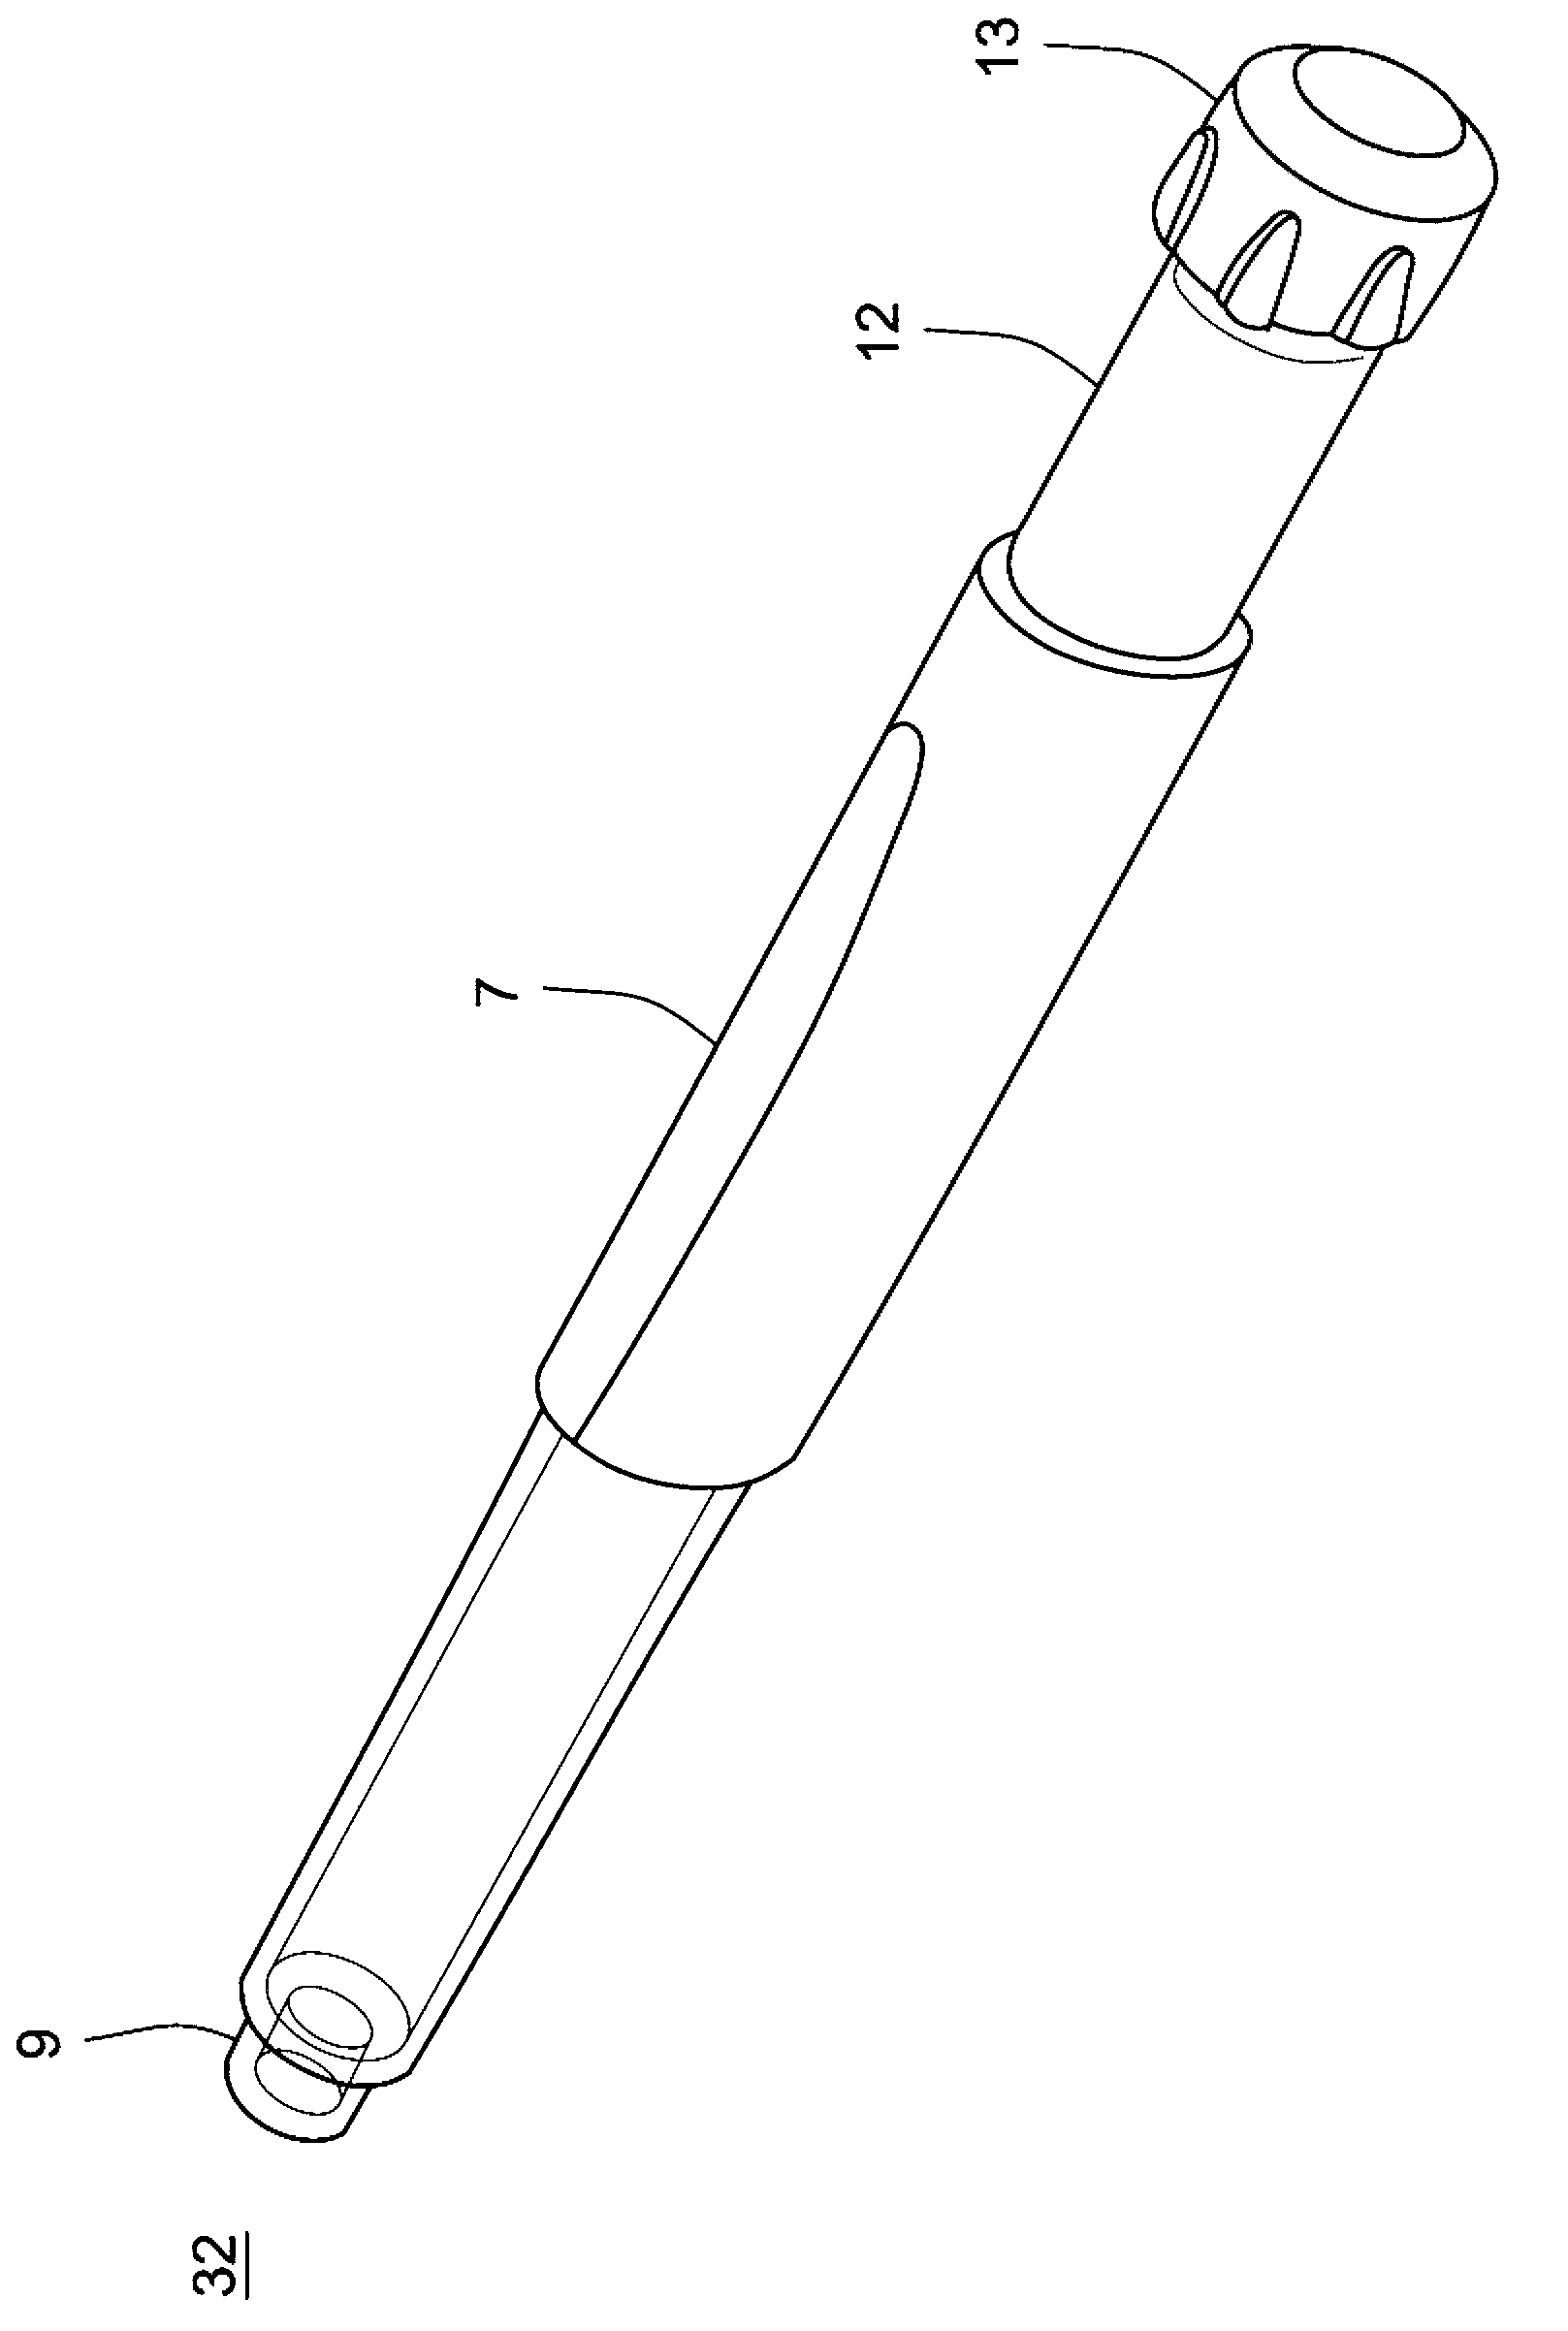 Medicated module with lockable needle guard